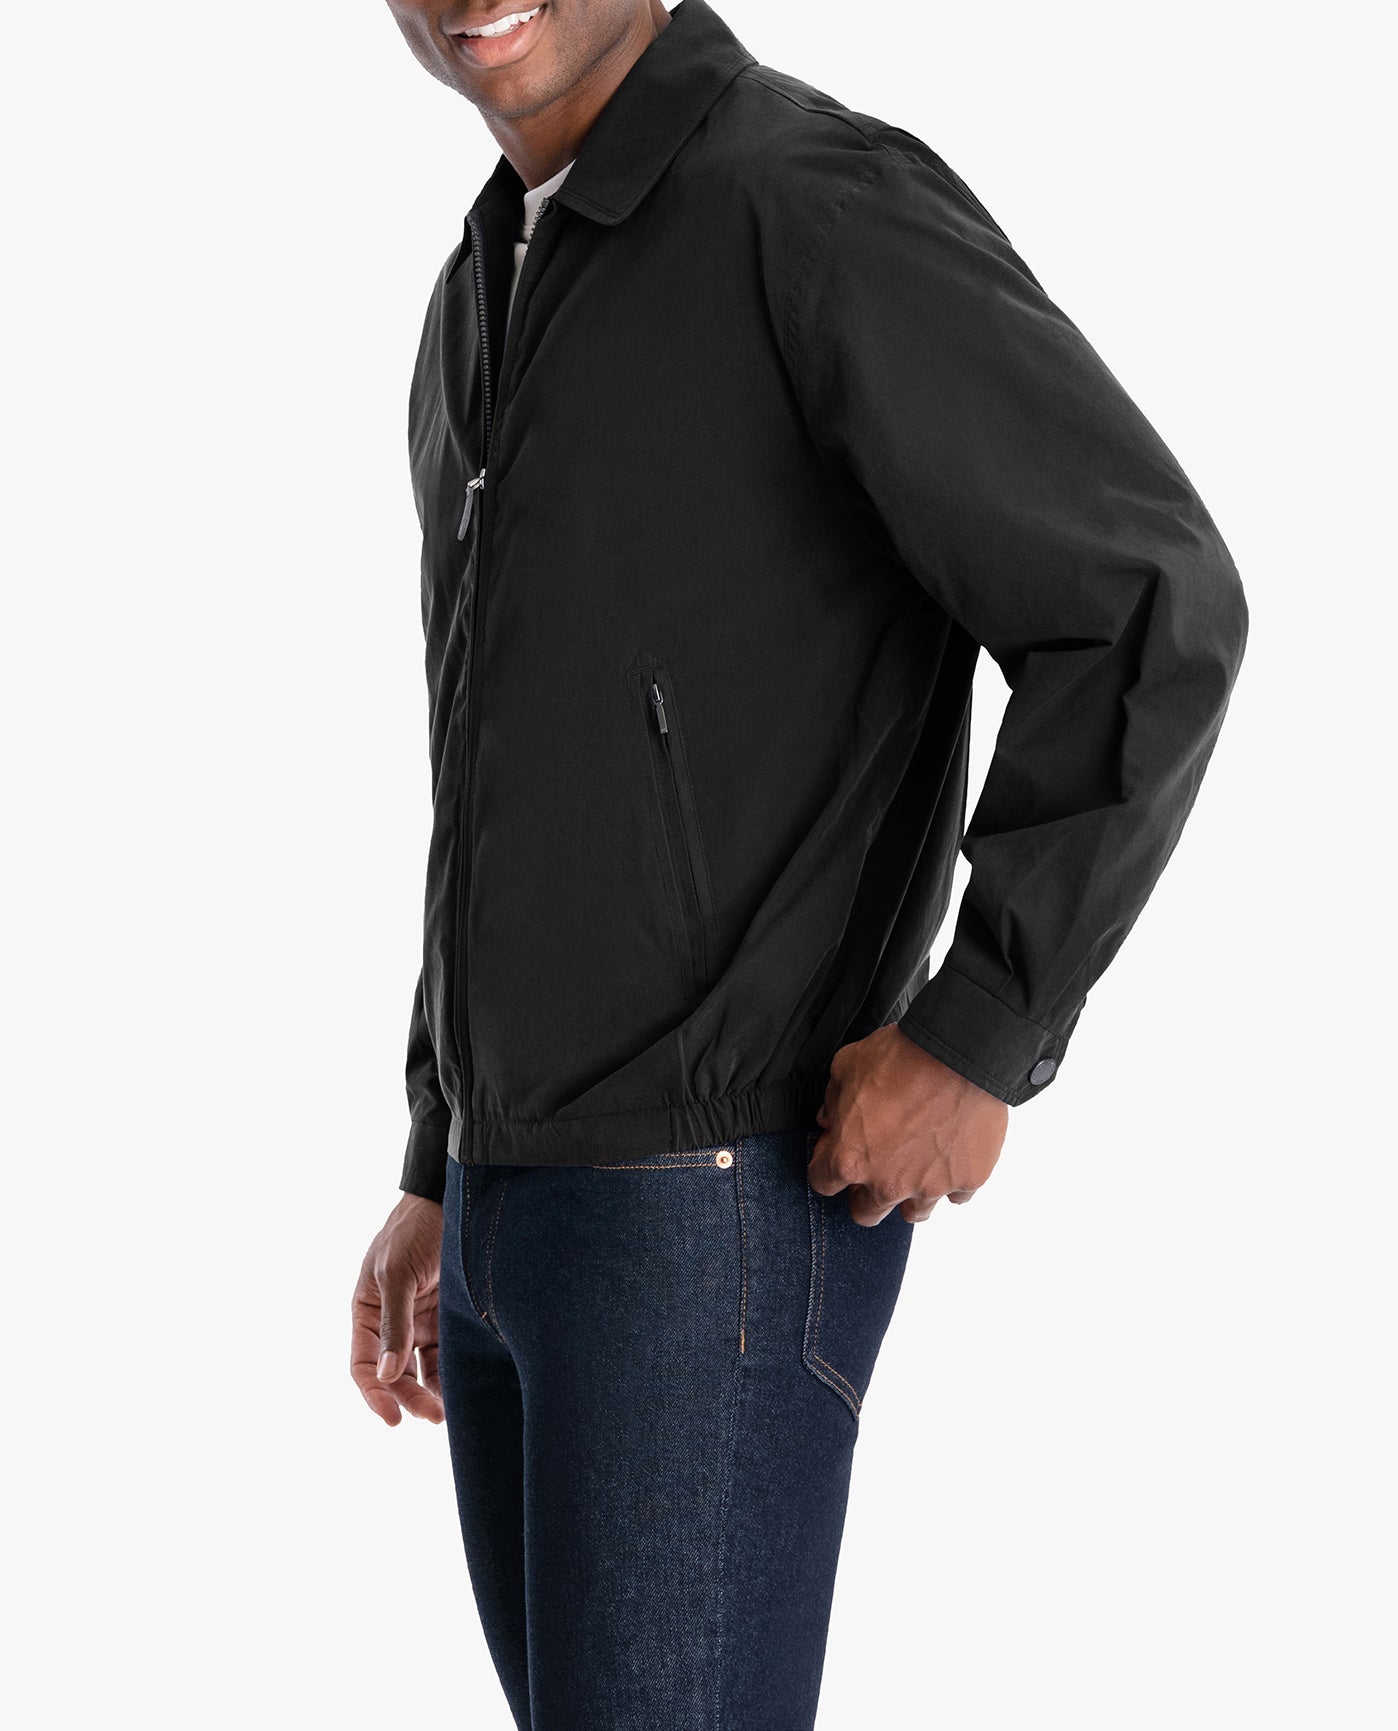 BACK VIEW OF TALL LIGHT WEIGHT ZIP FRONT GOLF JACKET | BLACK